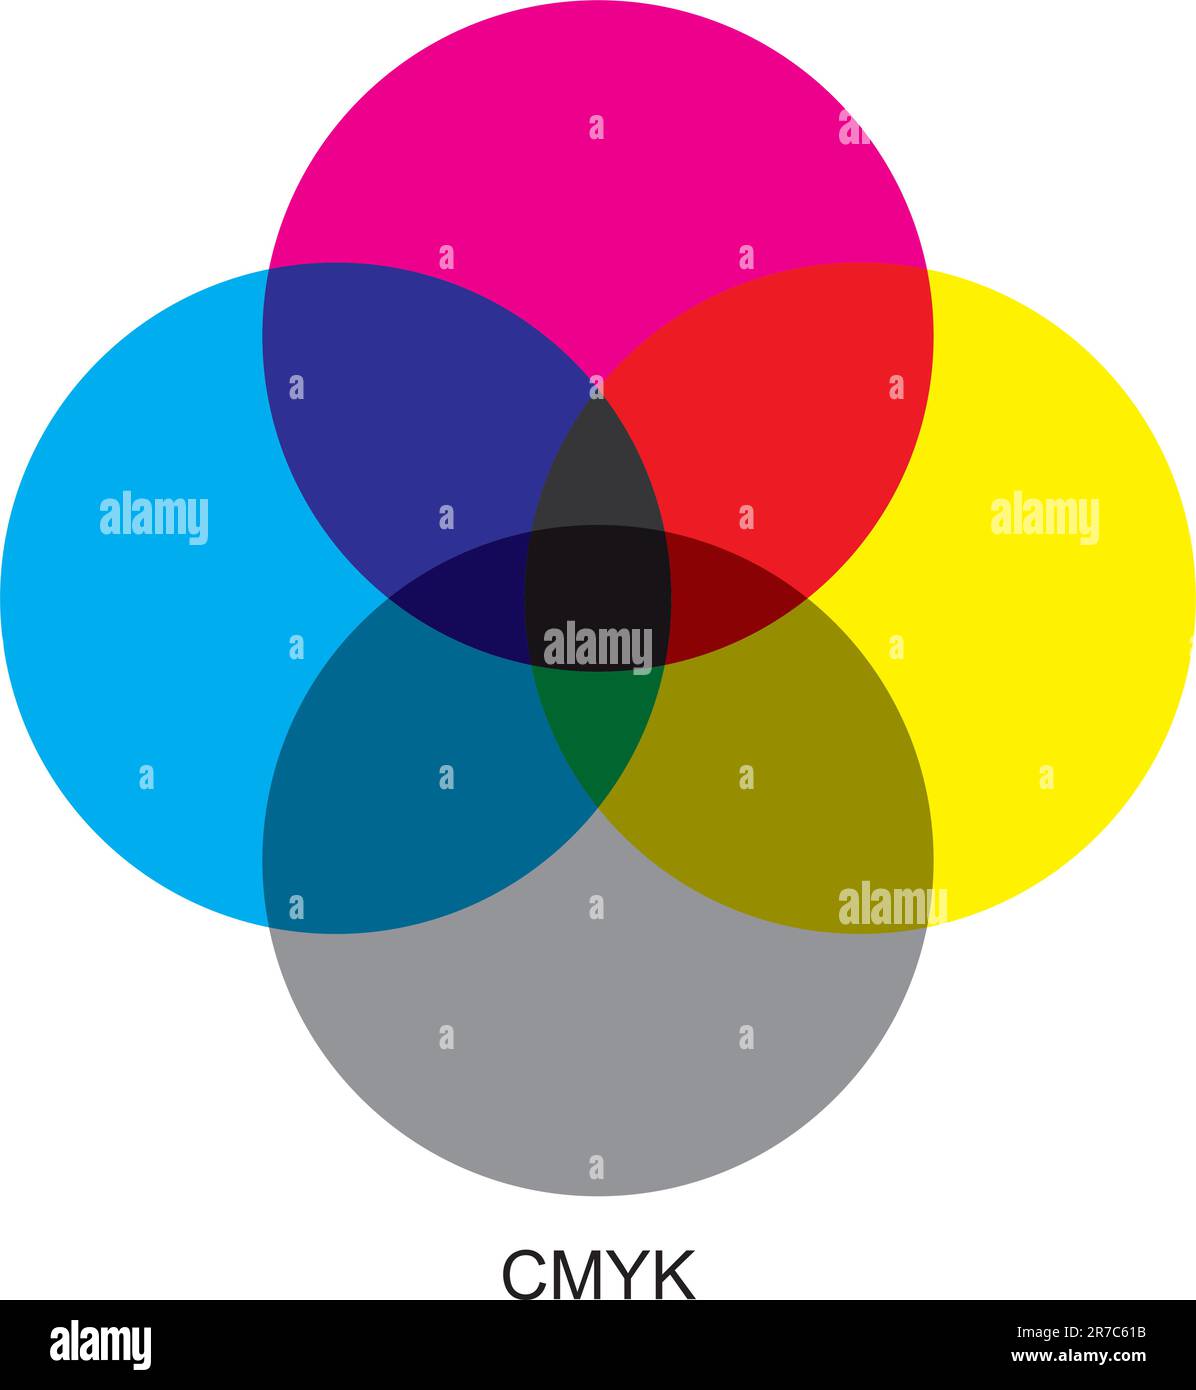 Vector chart explaining difference between CMYK color modes. Stock Vector